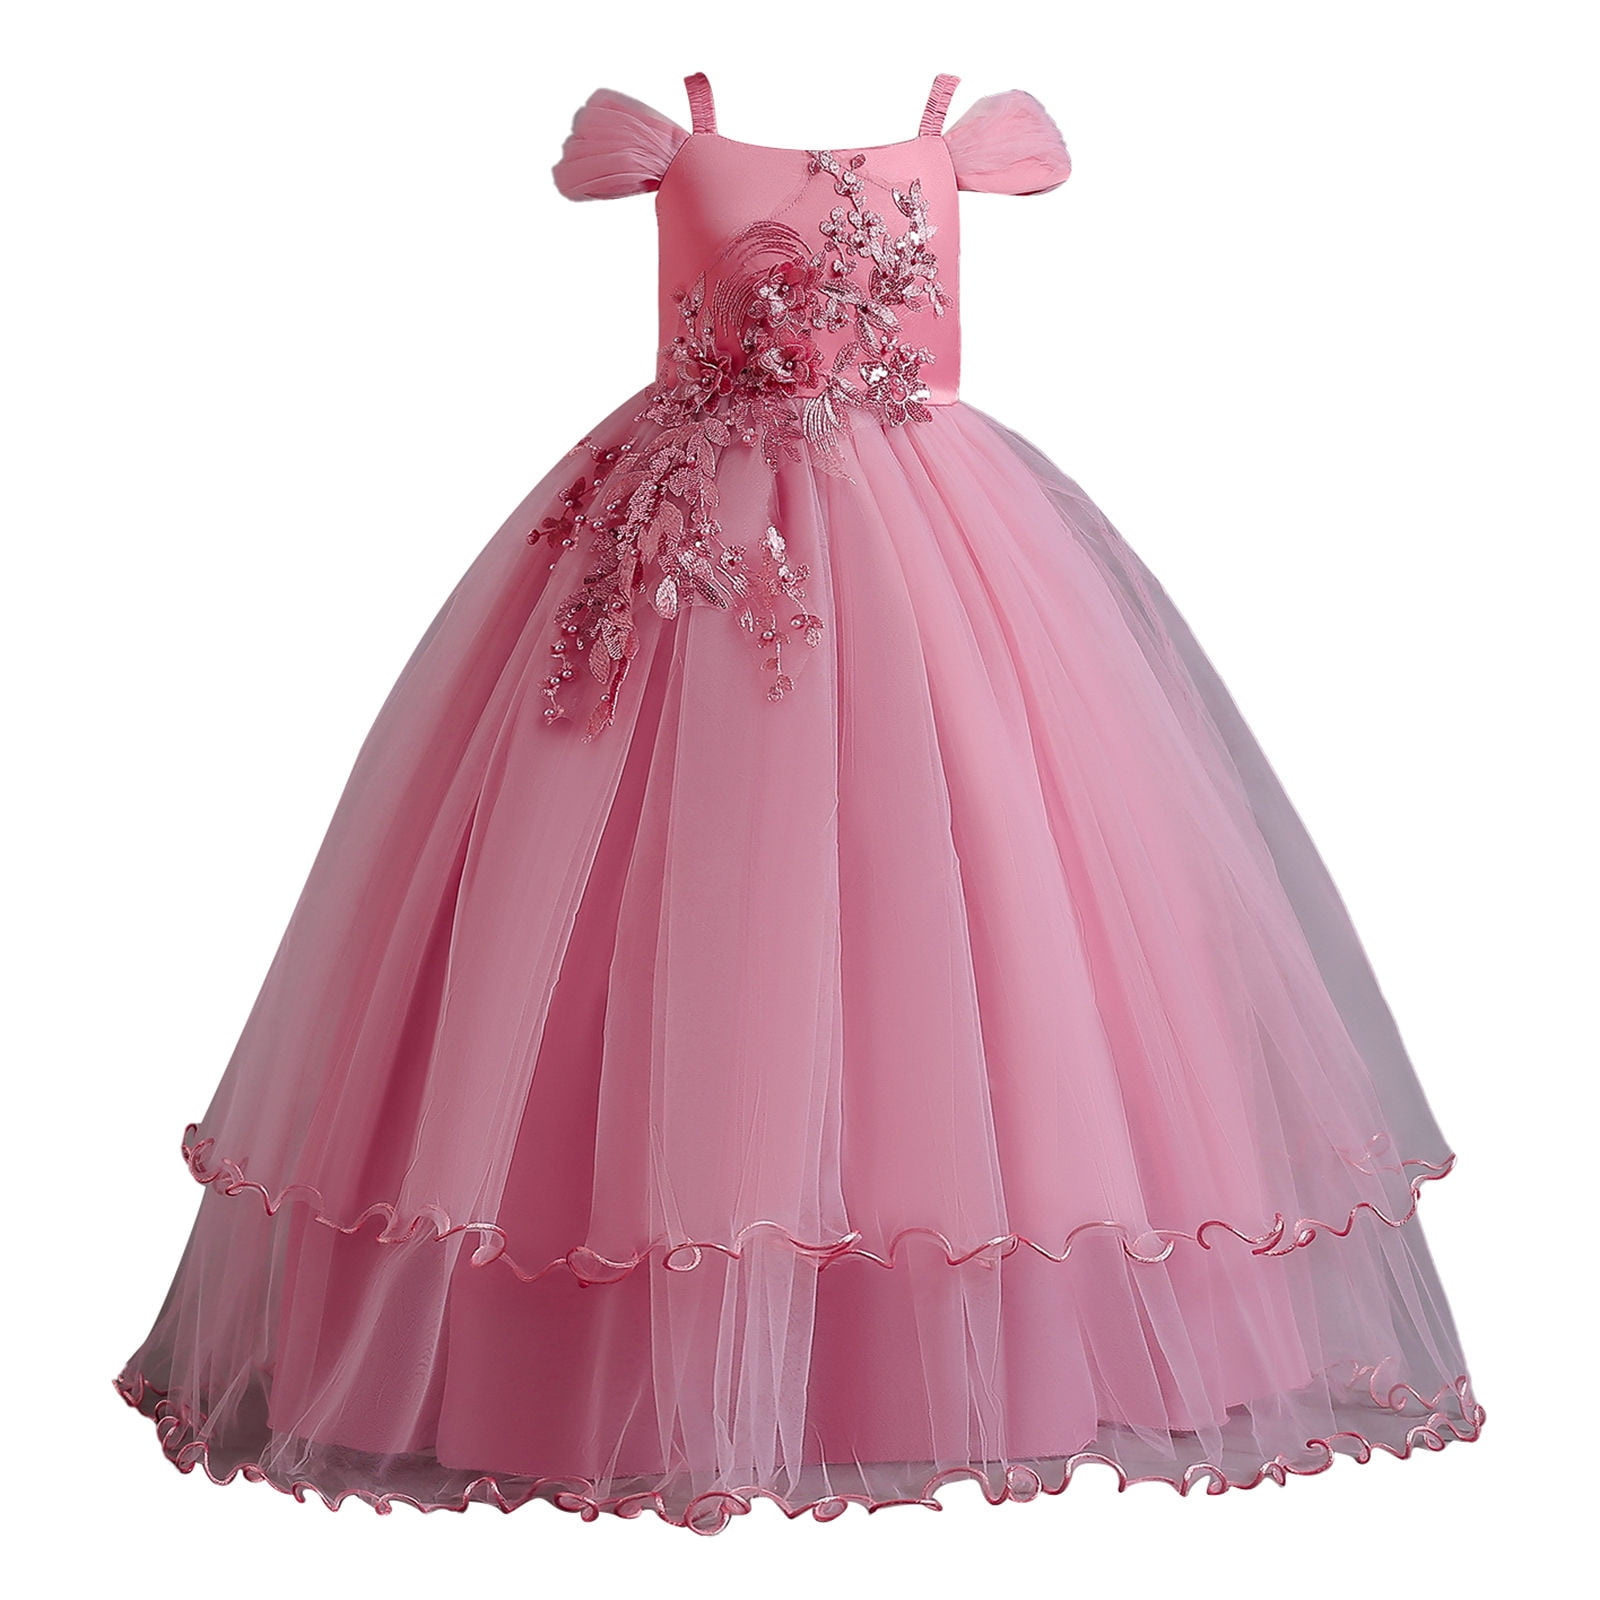 LONG GOWN FOR 11 TO 12 YEARS GIRL : Amazon.in: Clothing & Accessories